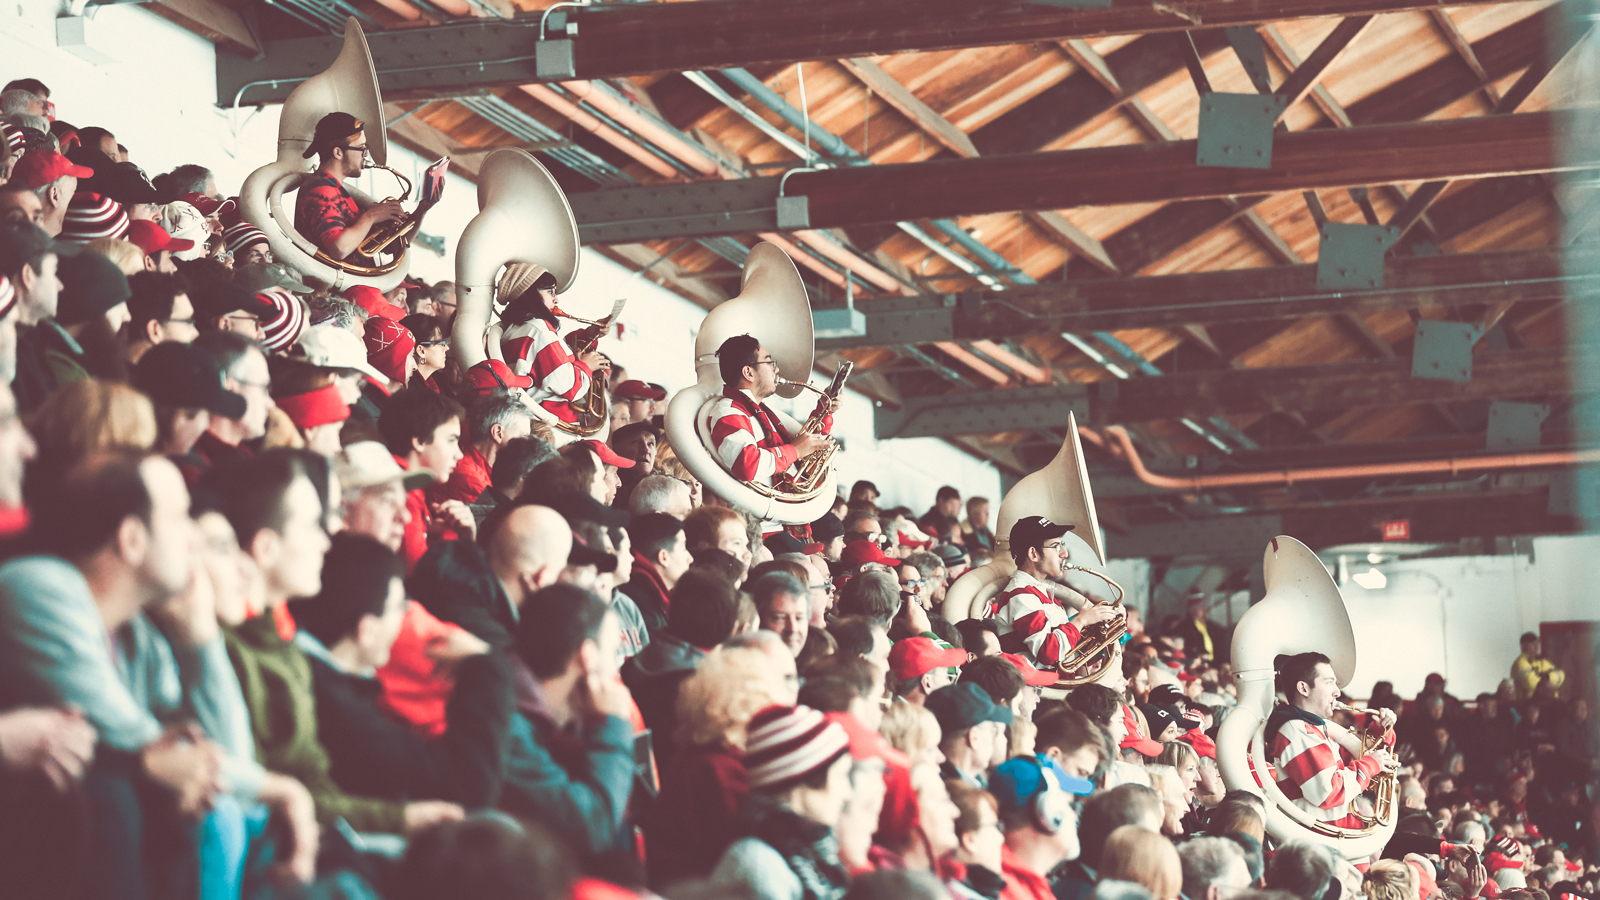 The crowd at a Cornell hockey game, including several members of a pep band playing their horns in the audience.